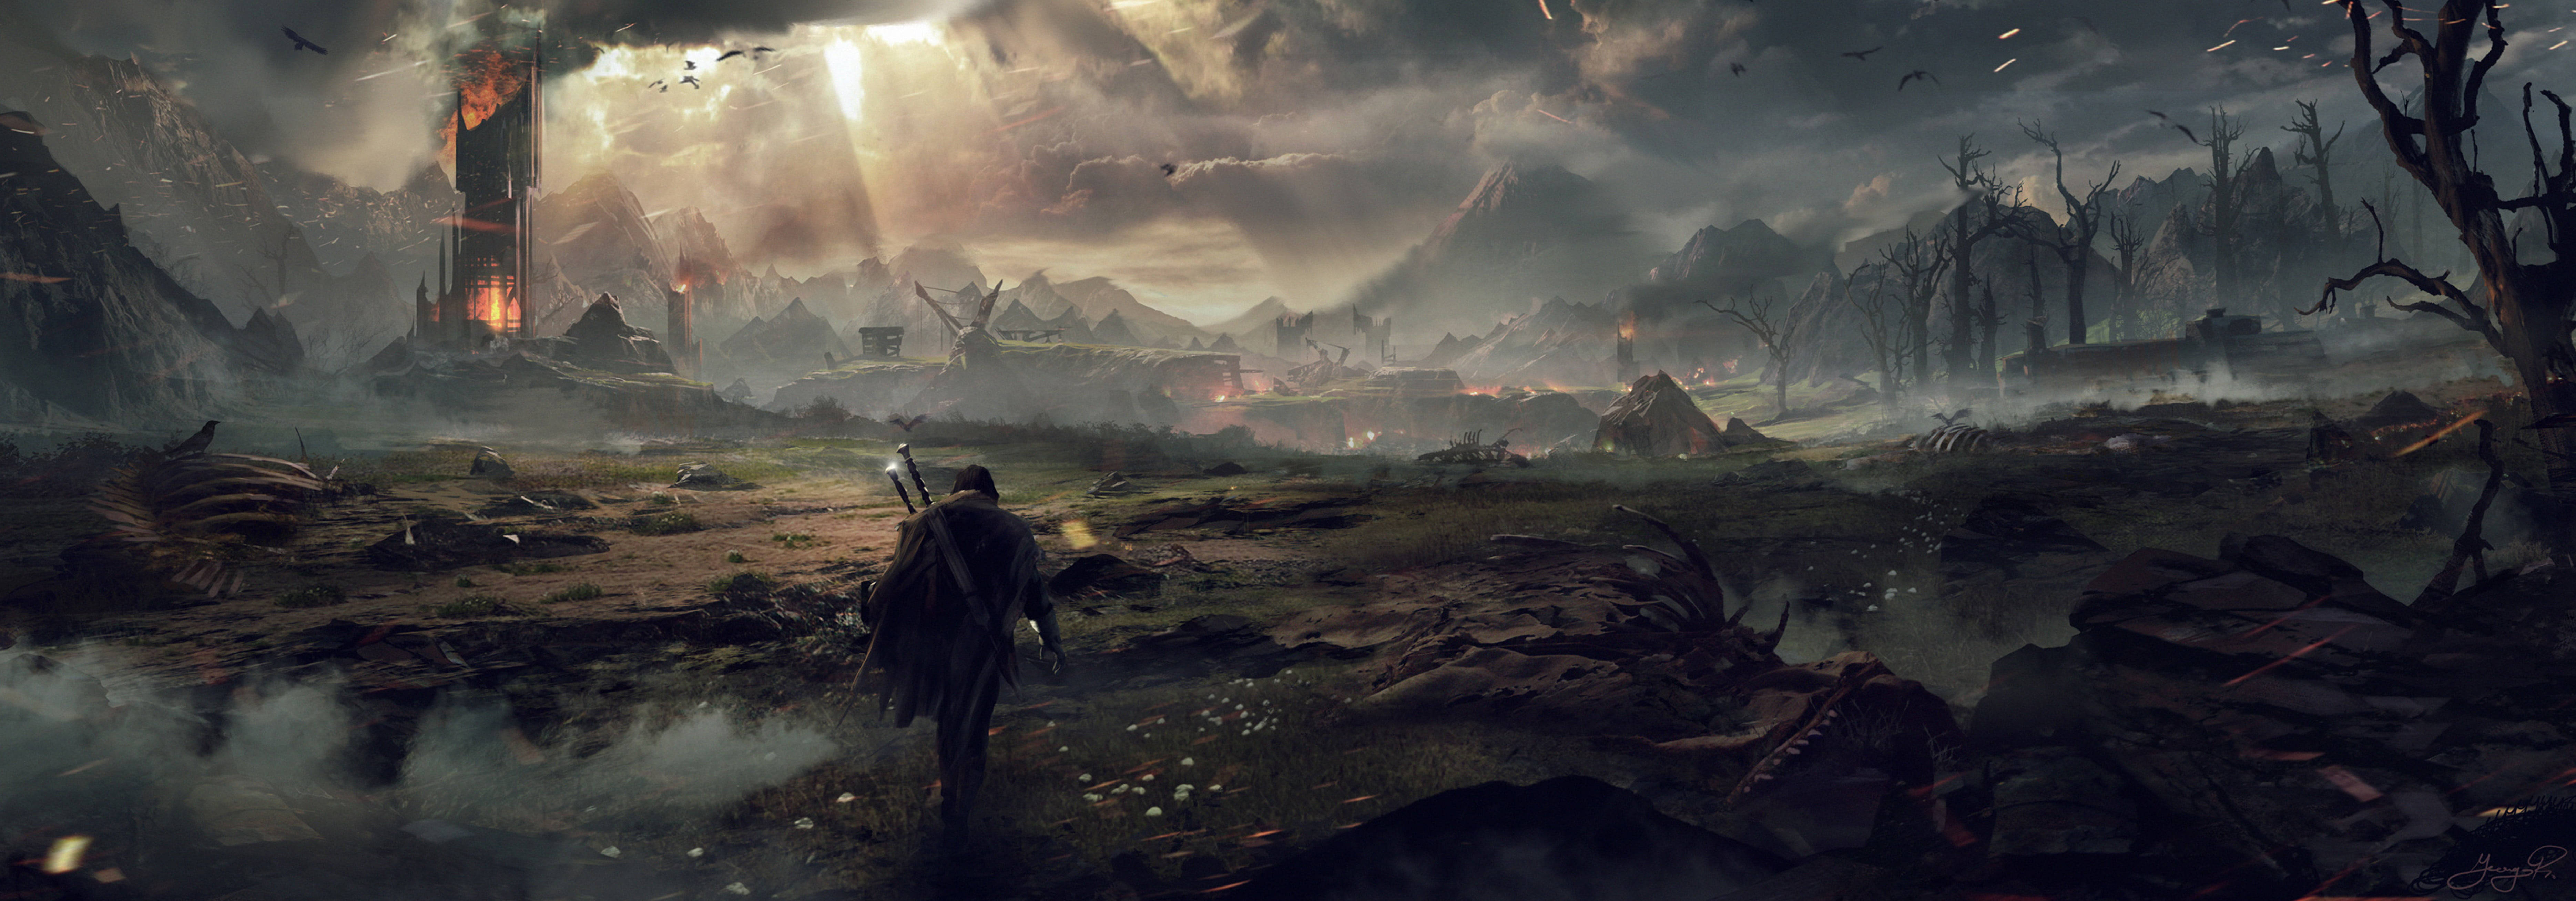 Lord Of The Rings Landscape Destroyed Land Wallpaper